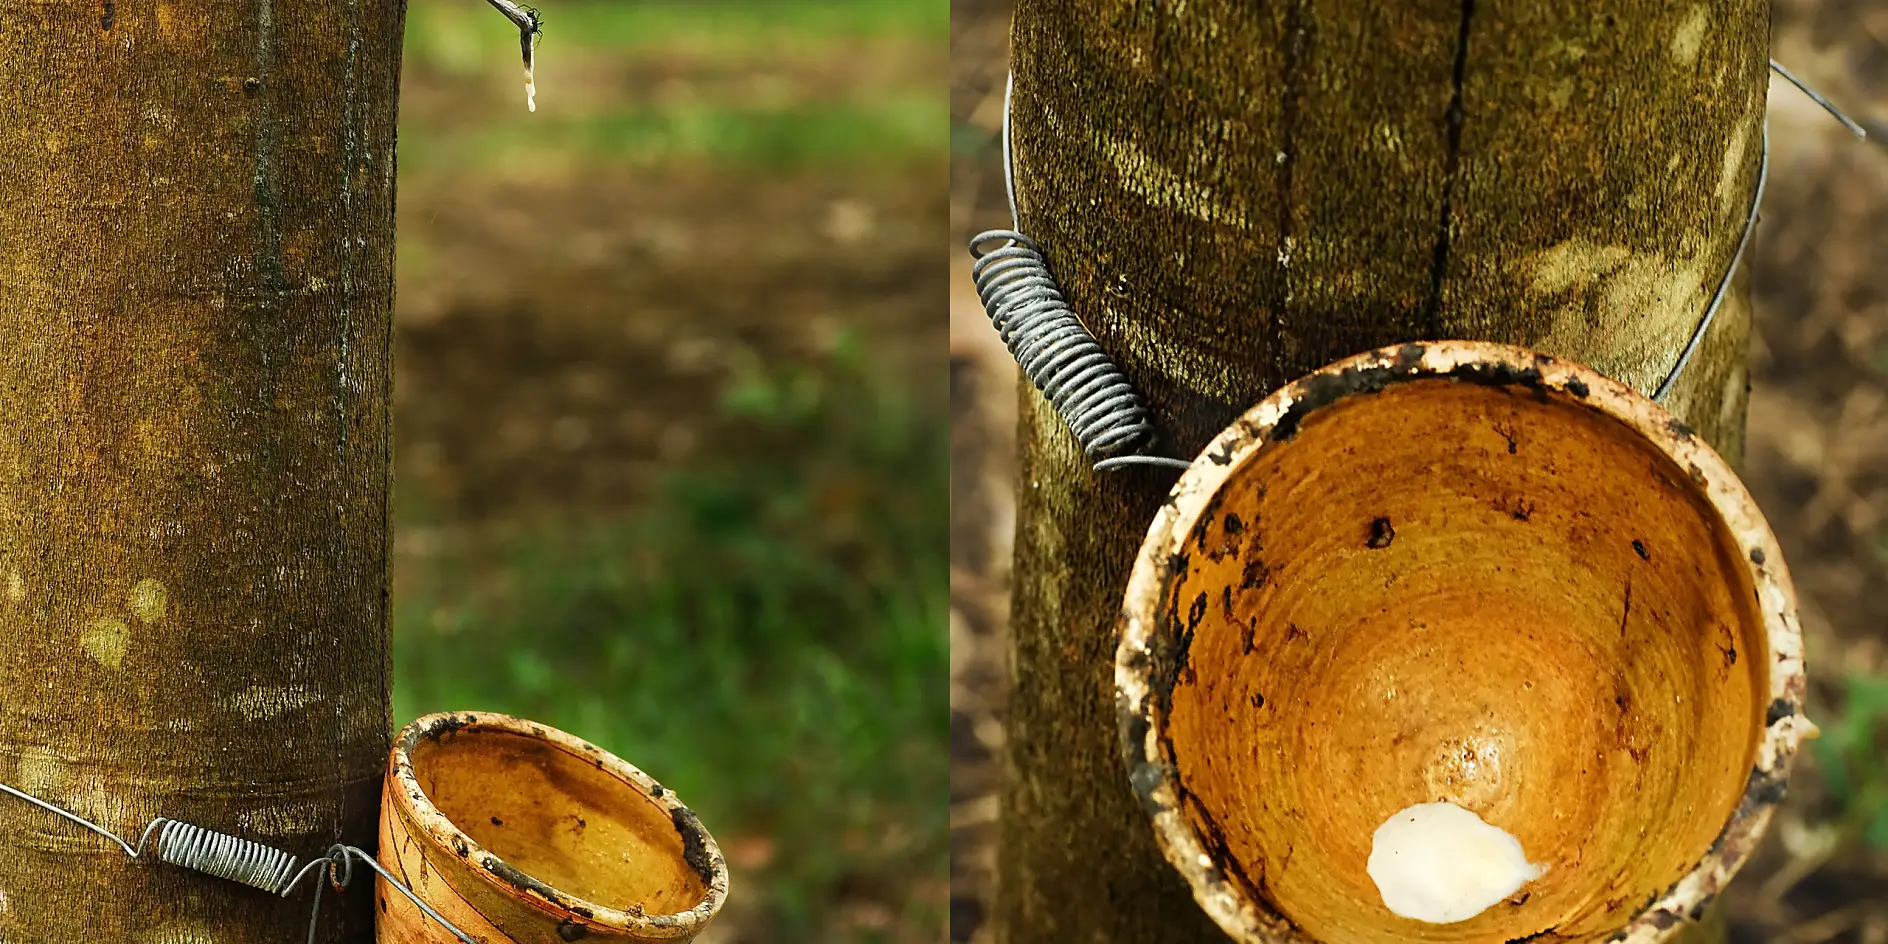 Latex milk is directly extracted from the rubber tree